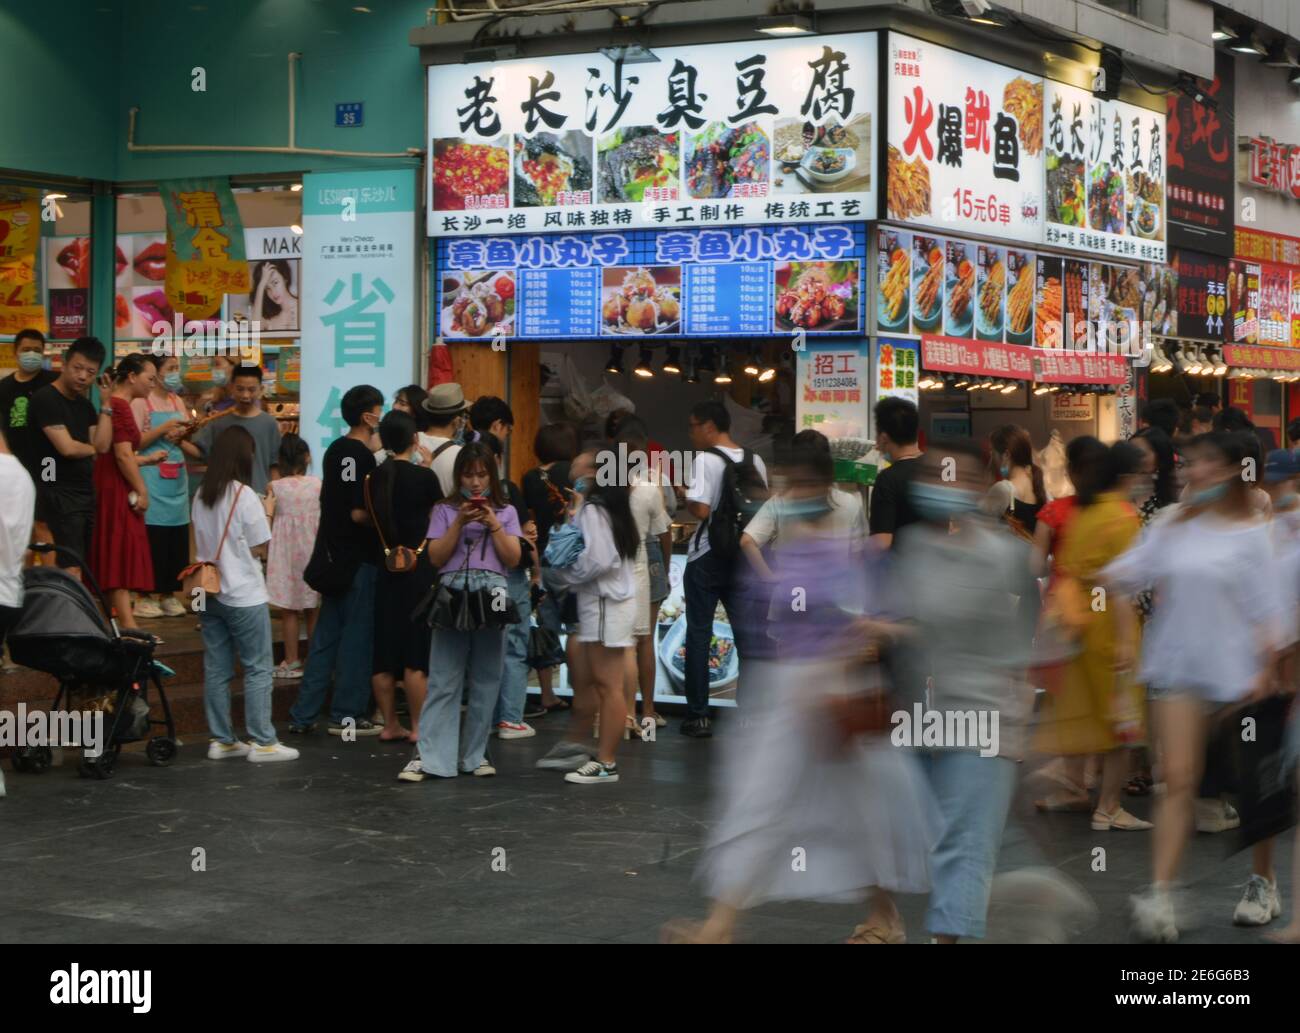 Some people stand still while others move quickly around the food stalls in dongmen street, Shenzhen, China. Stock Photo